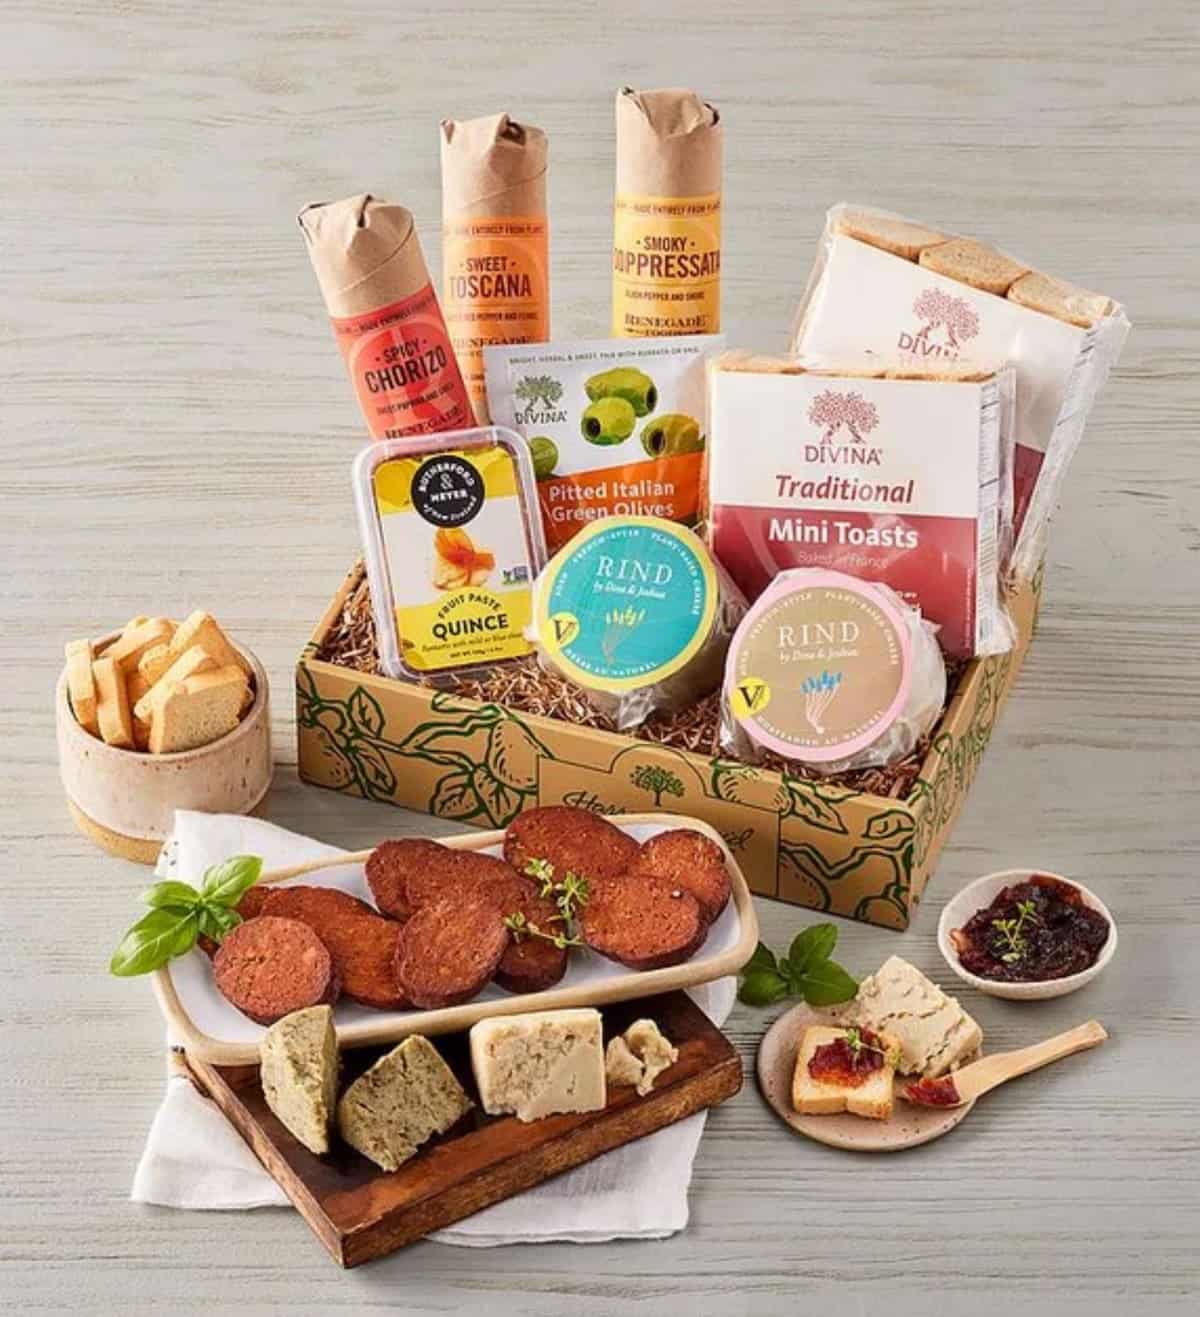 A vegan charcuterie box from Harry and David's.